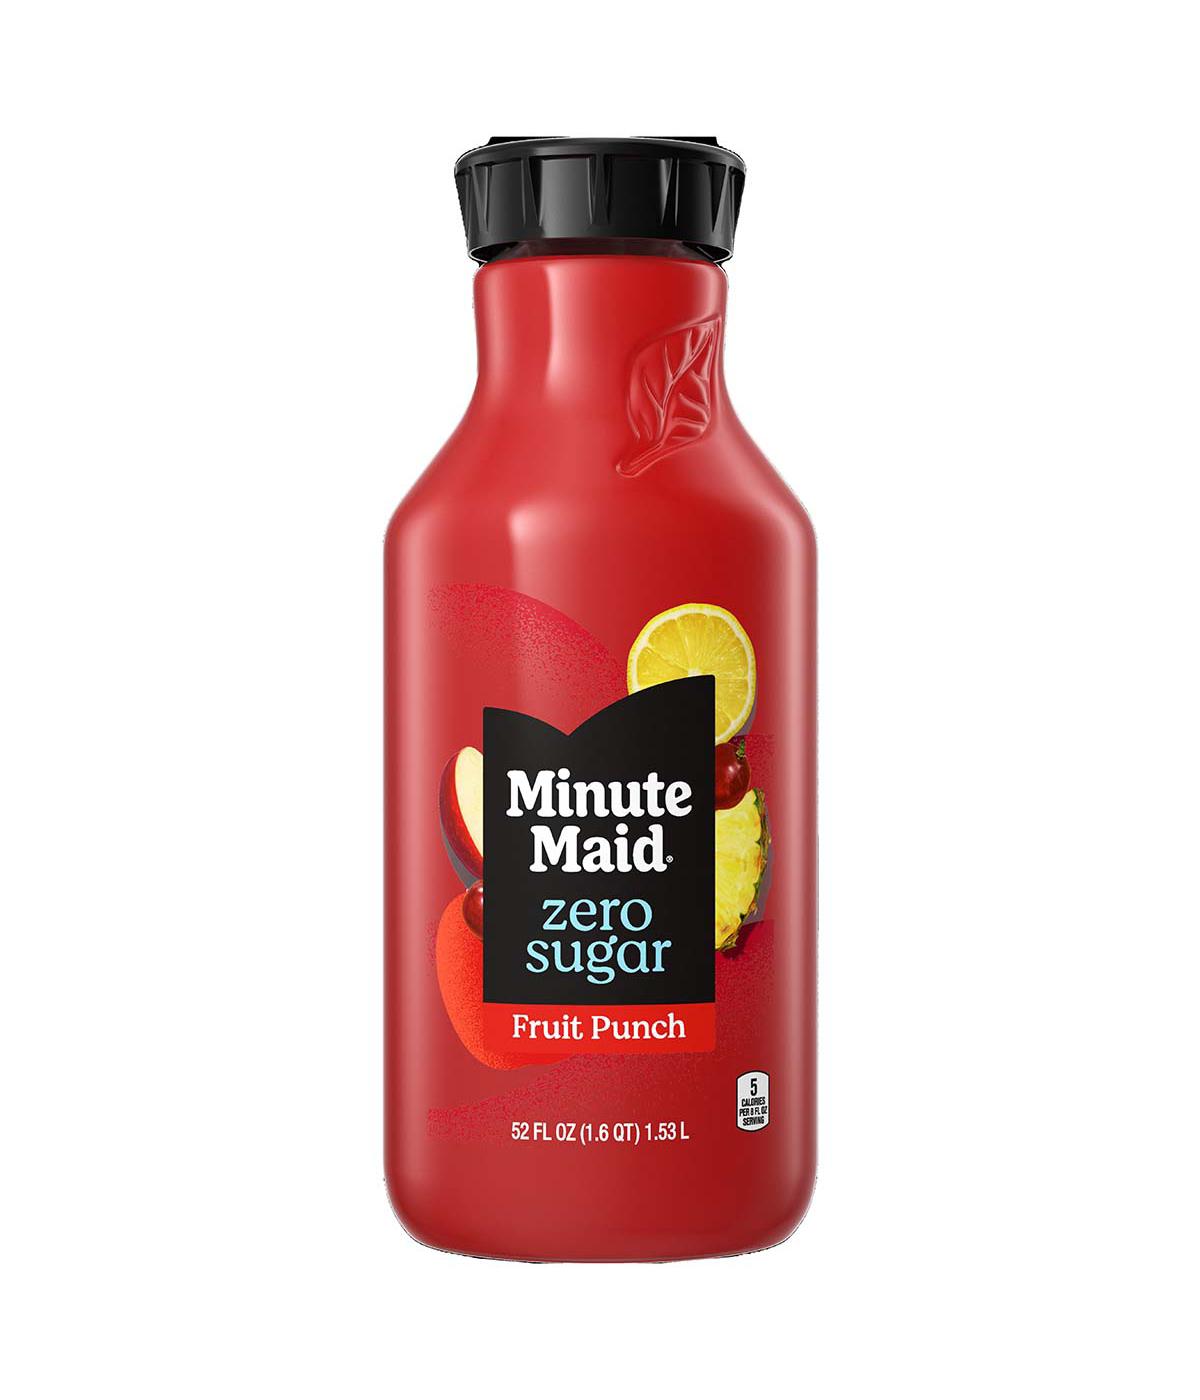 Minute Maid Zero Sugar Fruit Punch Drink; image 1 of 2